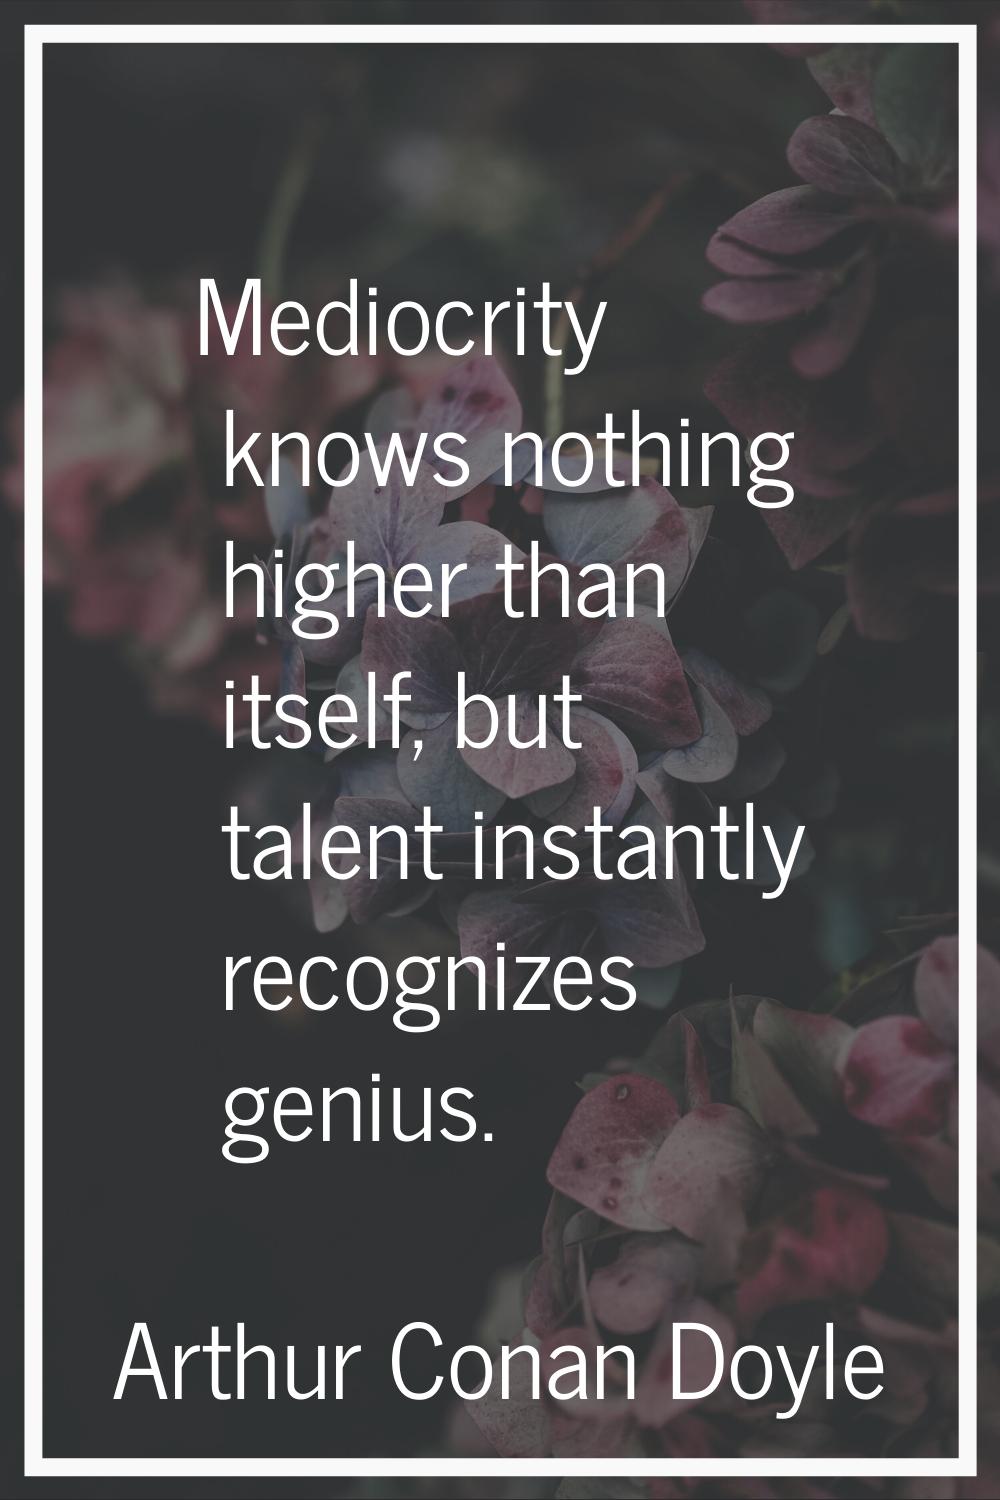 Mediocrity knows nothing higher than itself, but talent instantly recognizes genius.